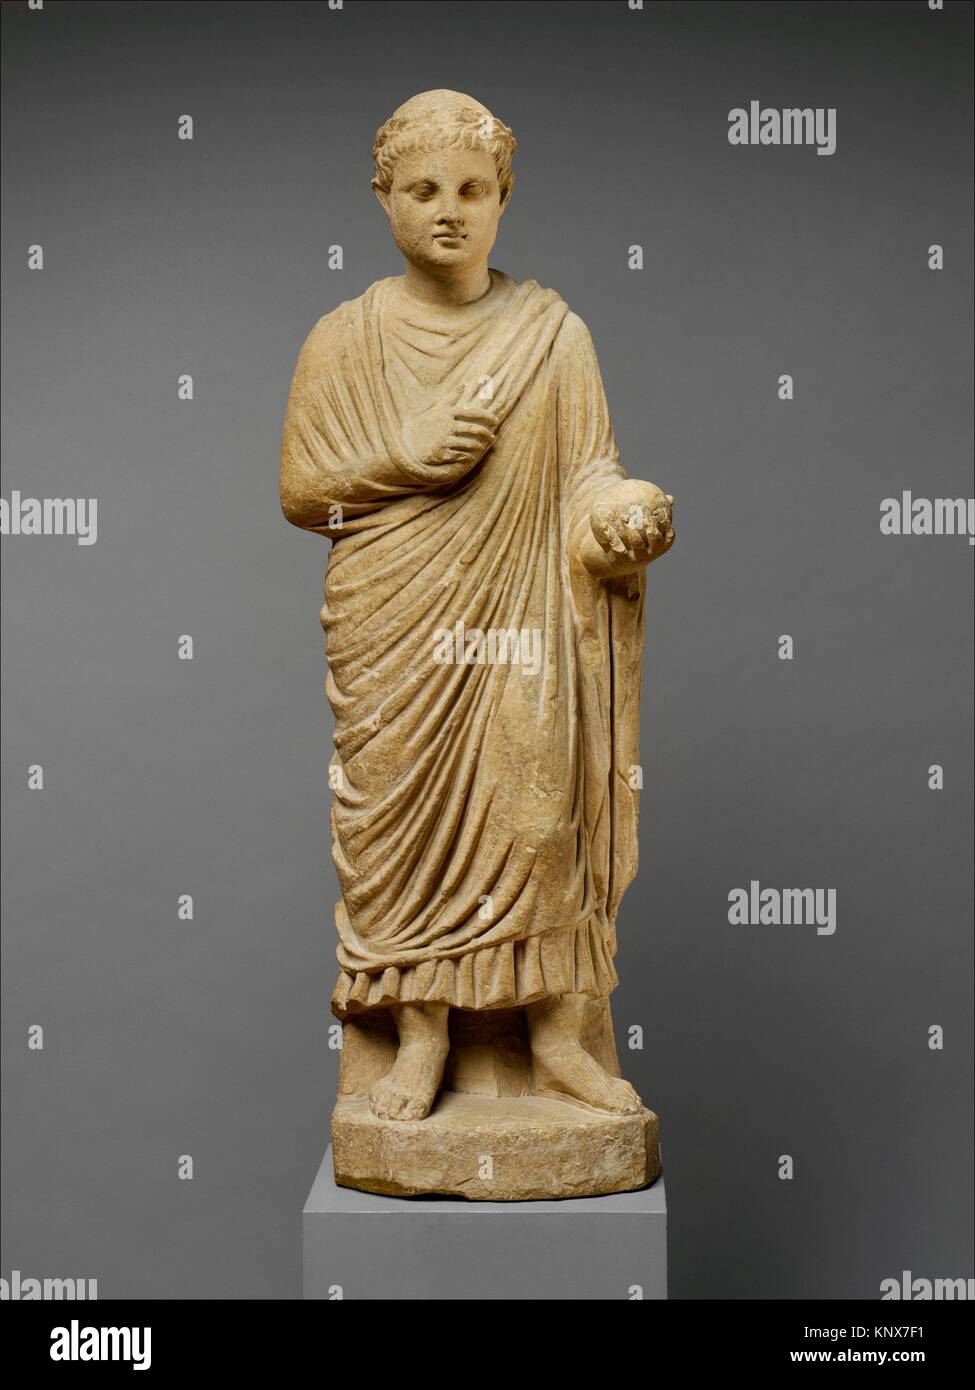 Limestone statue of a wreathed boy holding a ball or piece of fruit. Period: Hellenistic or Early Imperial; Date: 3rd century B.C.-1st century A.D; Stock Photo